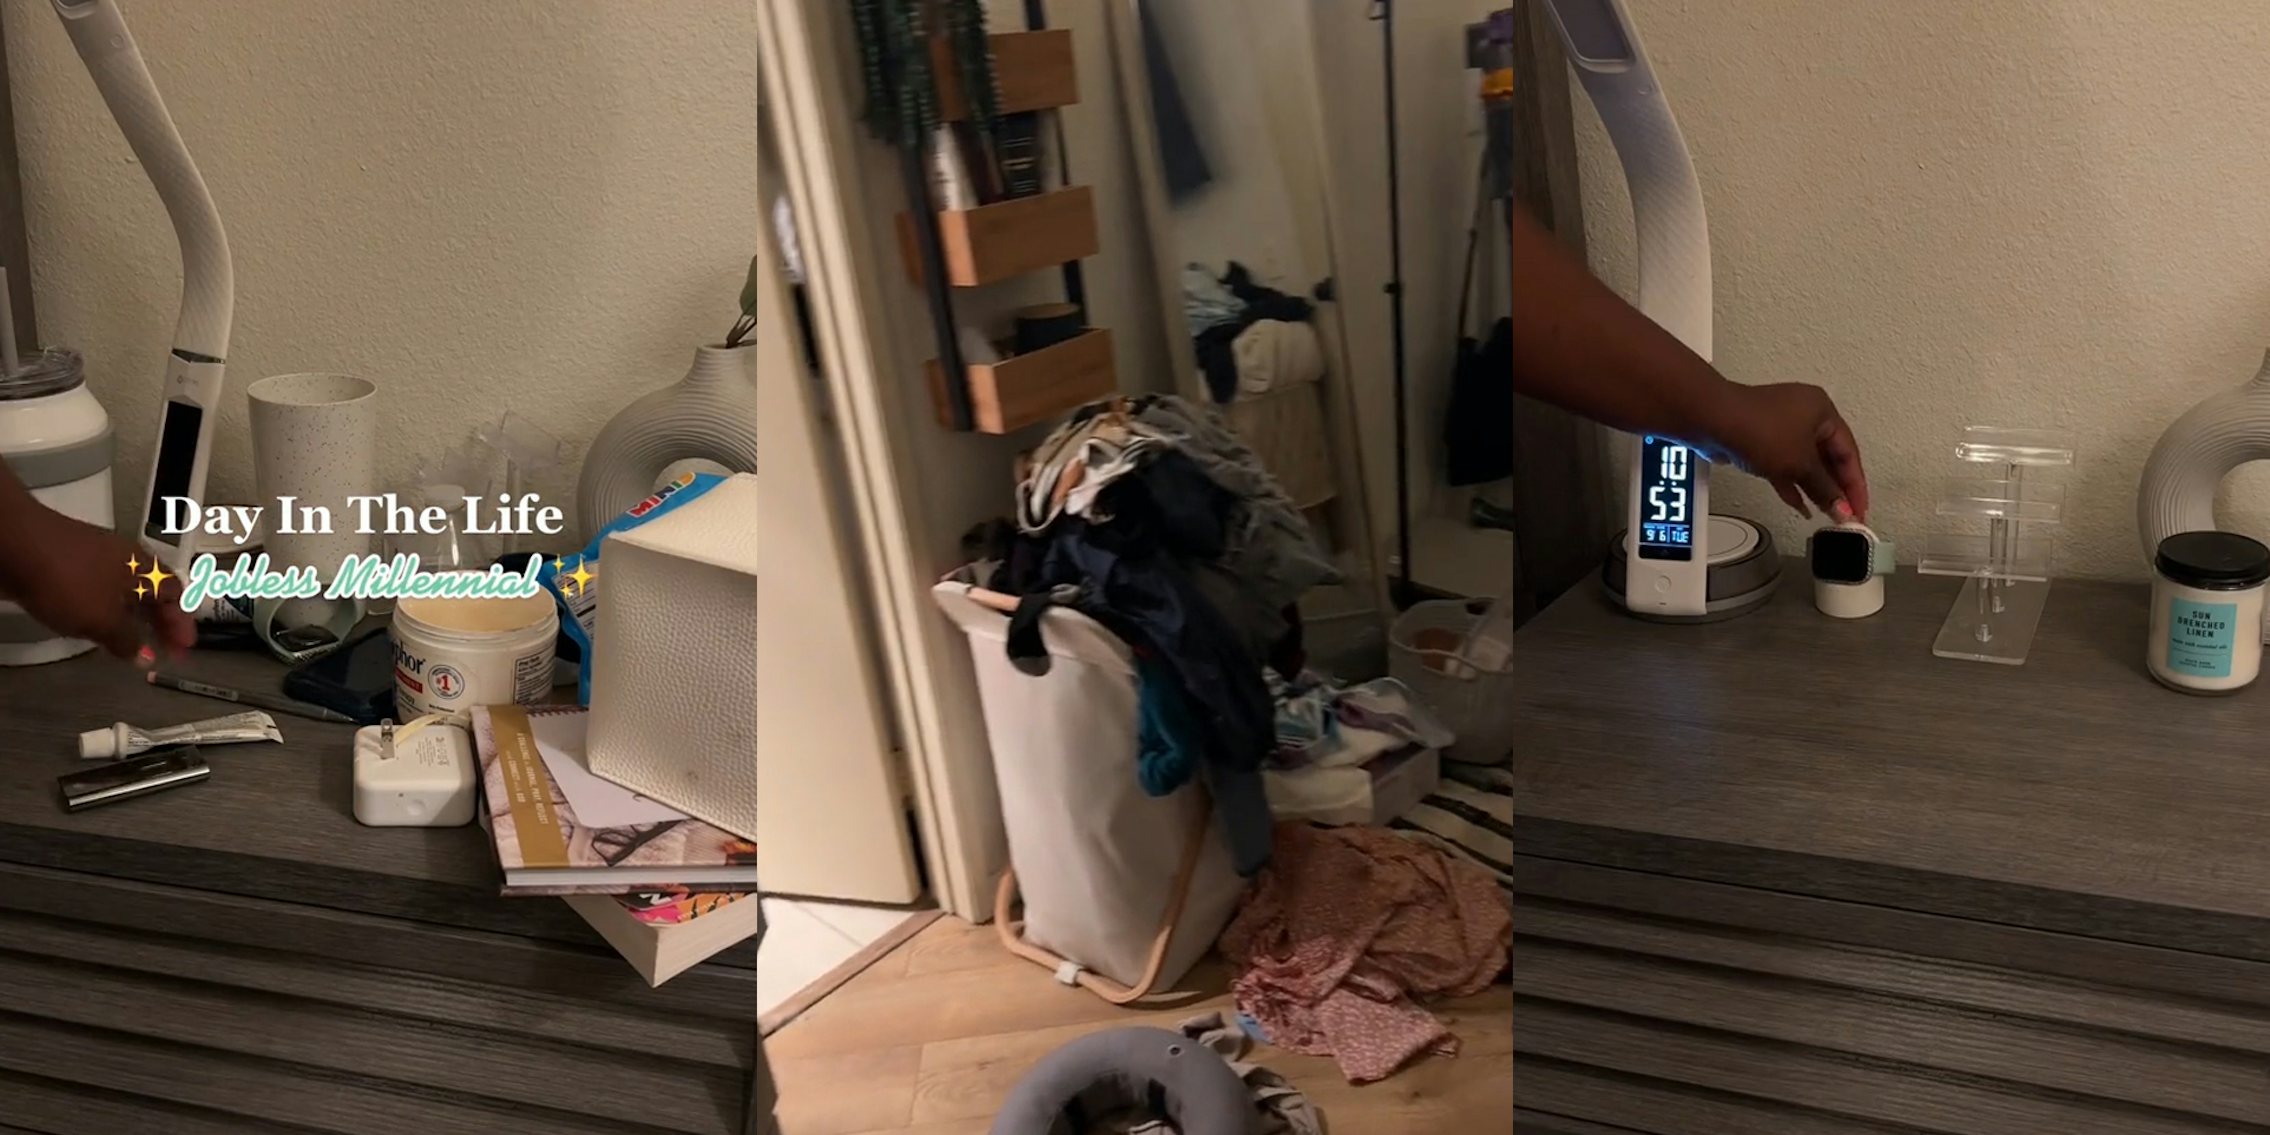 hand cleaning nightstand caption 'Day In The Life Jobless Millennial' (l) messy room with laundry on ground (c) hand setting up clean area on night stand touching apple watch (r)